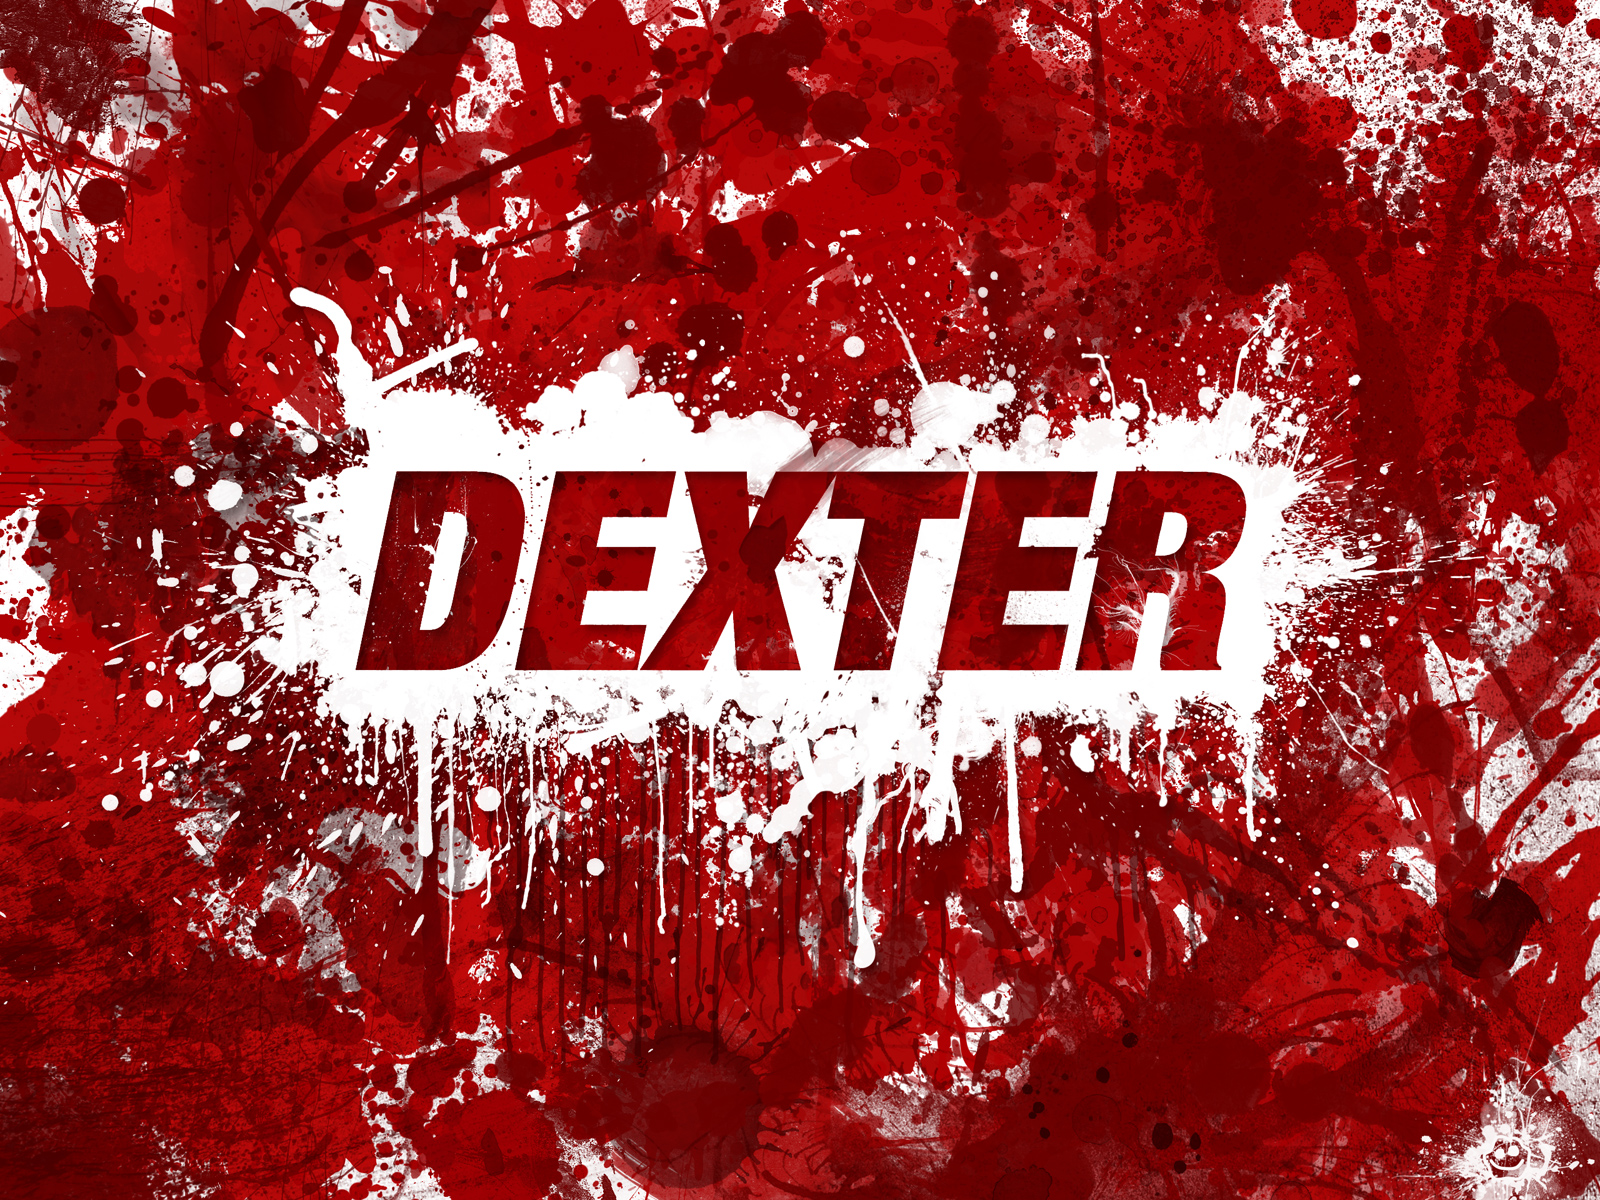 Dexter Blood Spatter Image Pictures Becuo